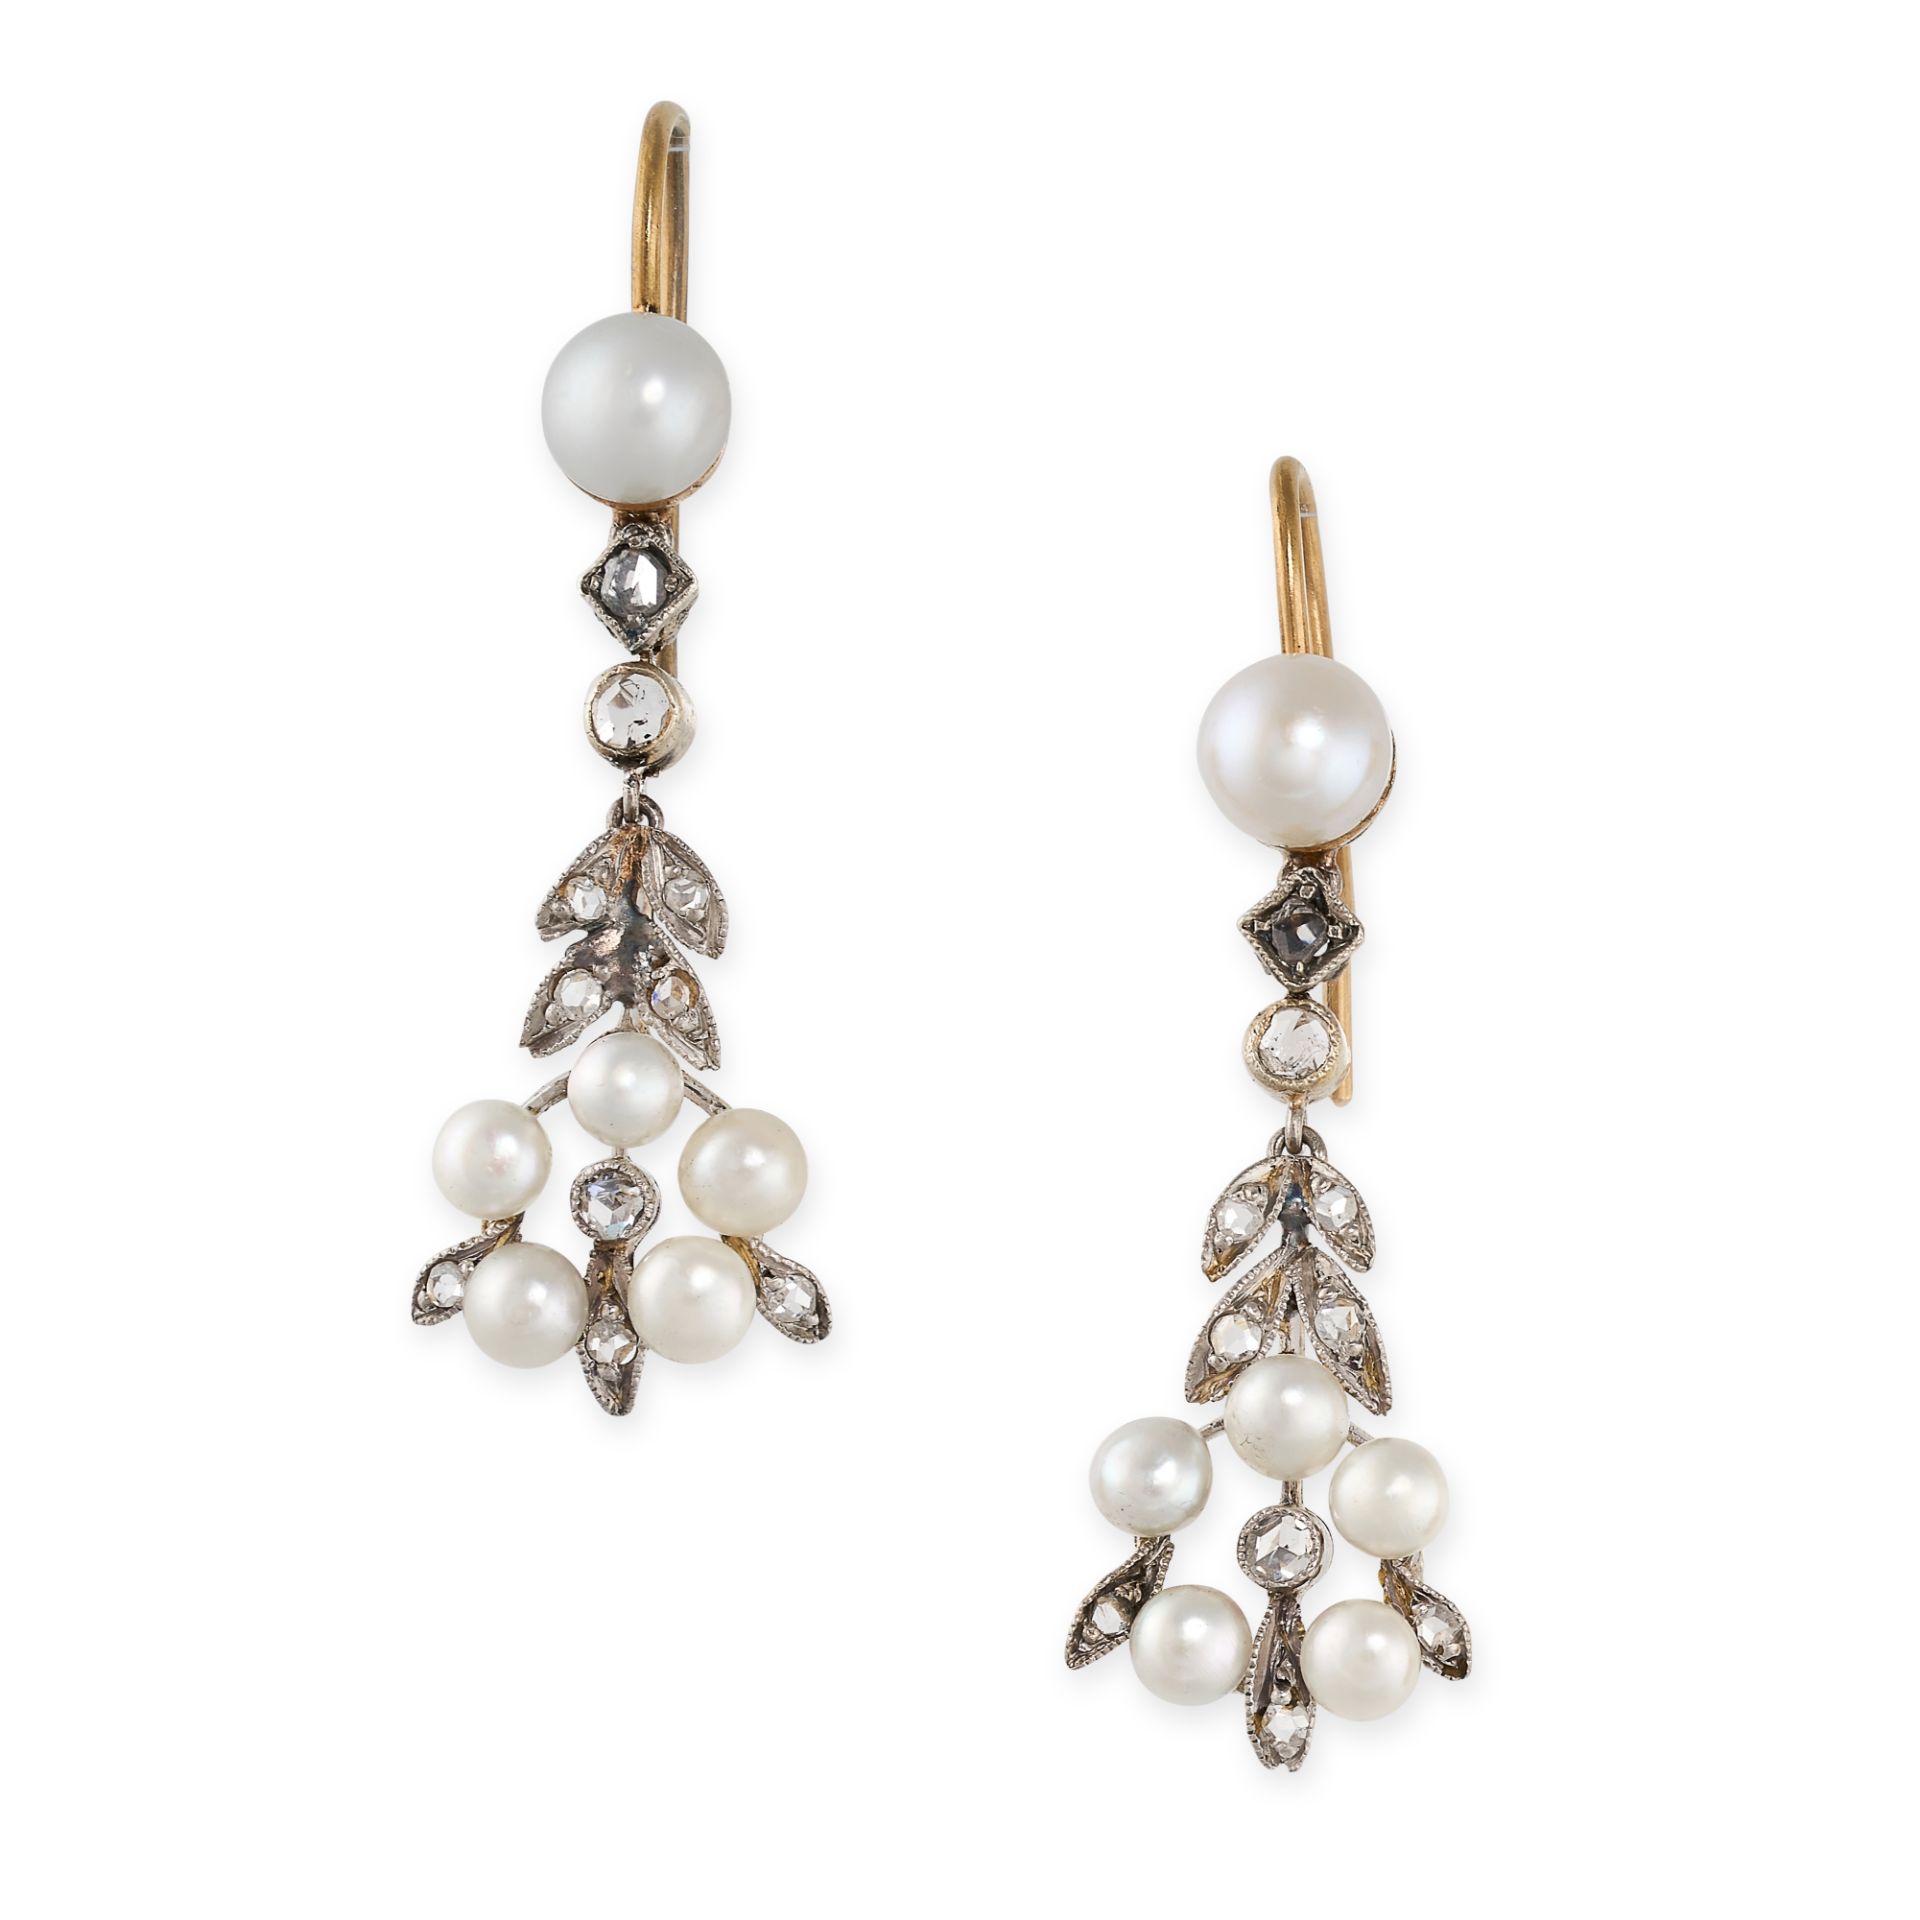 A PAIR OF PEARL AND DIAMOND EARRINGS, EARLY 20TH CENTURY in yellow gold and platinum, each set